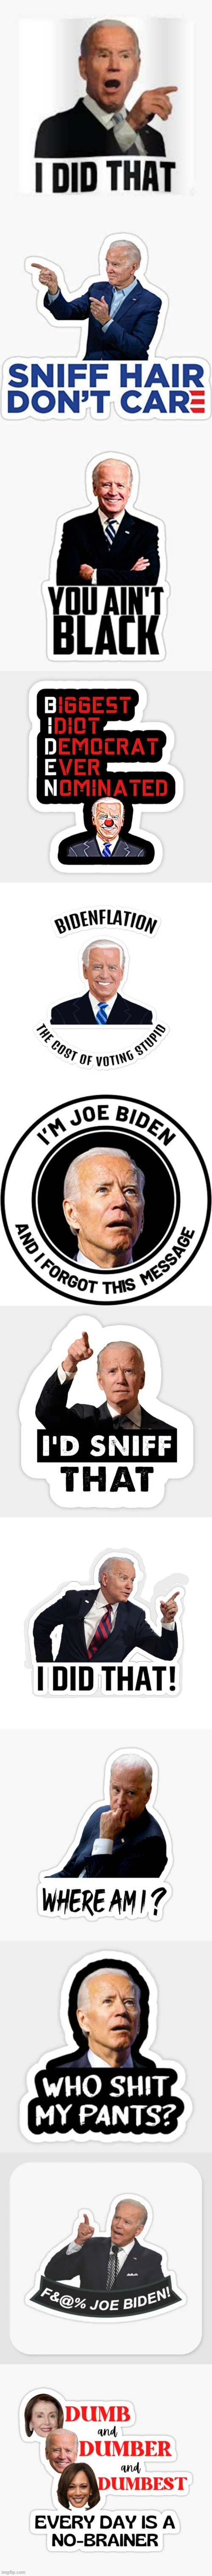 Which Do You Like The Best? | image tagged in memes,politics,joe biden,stickers,would you like to,choose | made w/ Imgflip meme maker